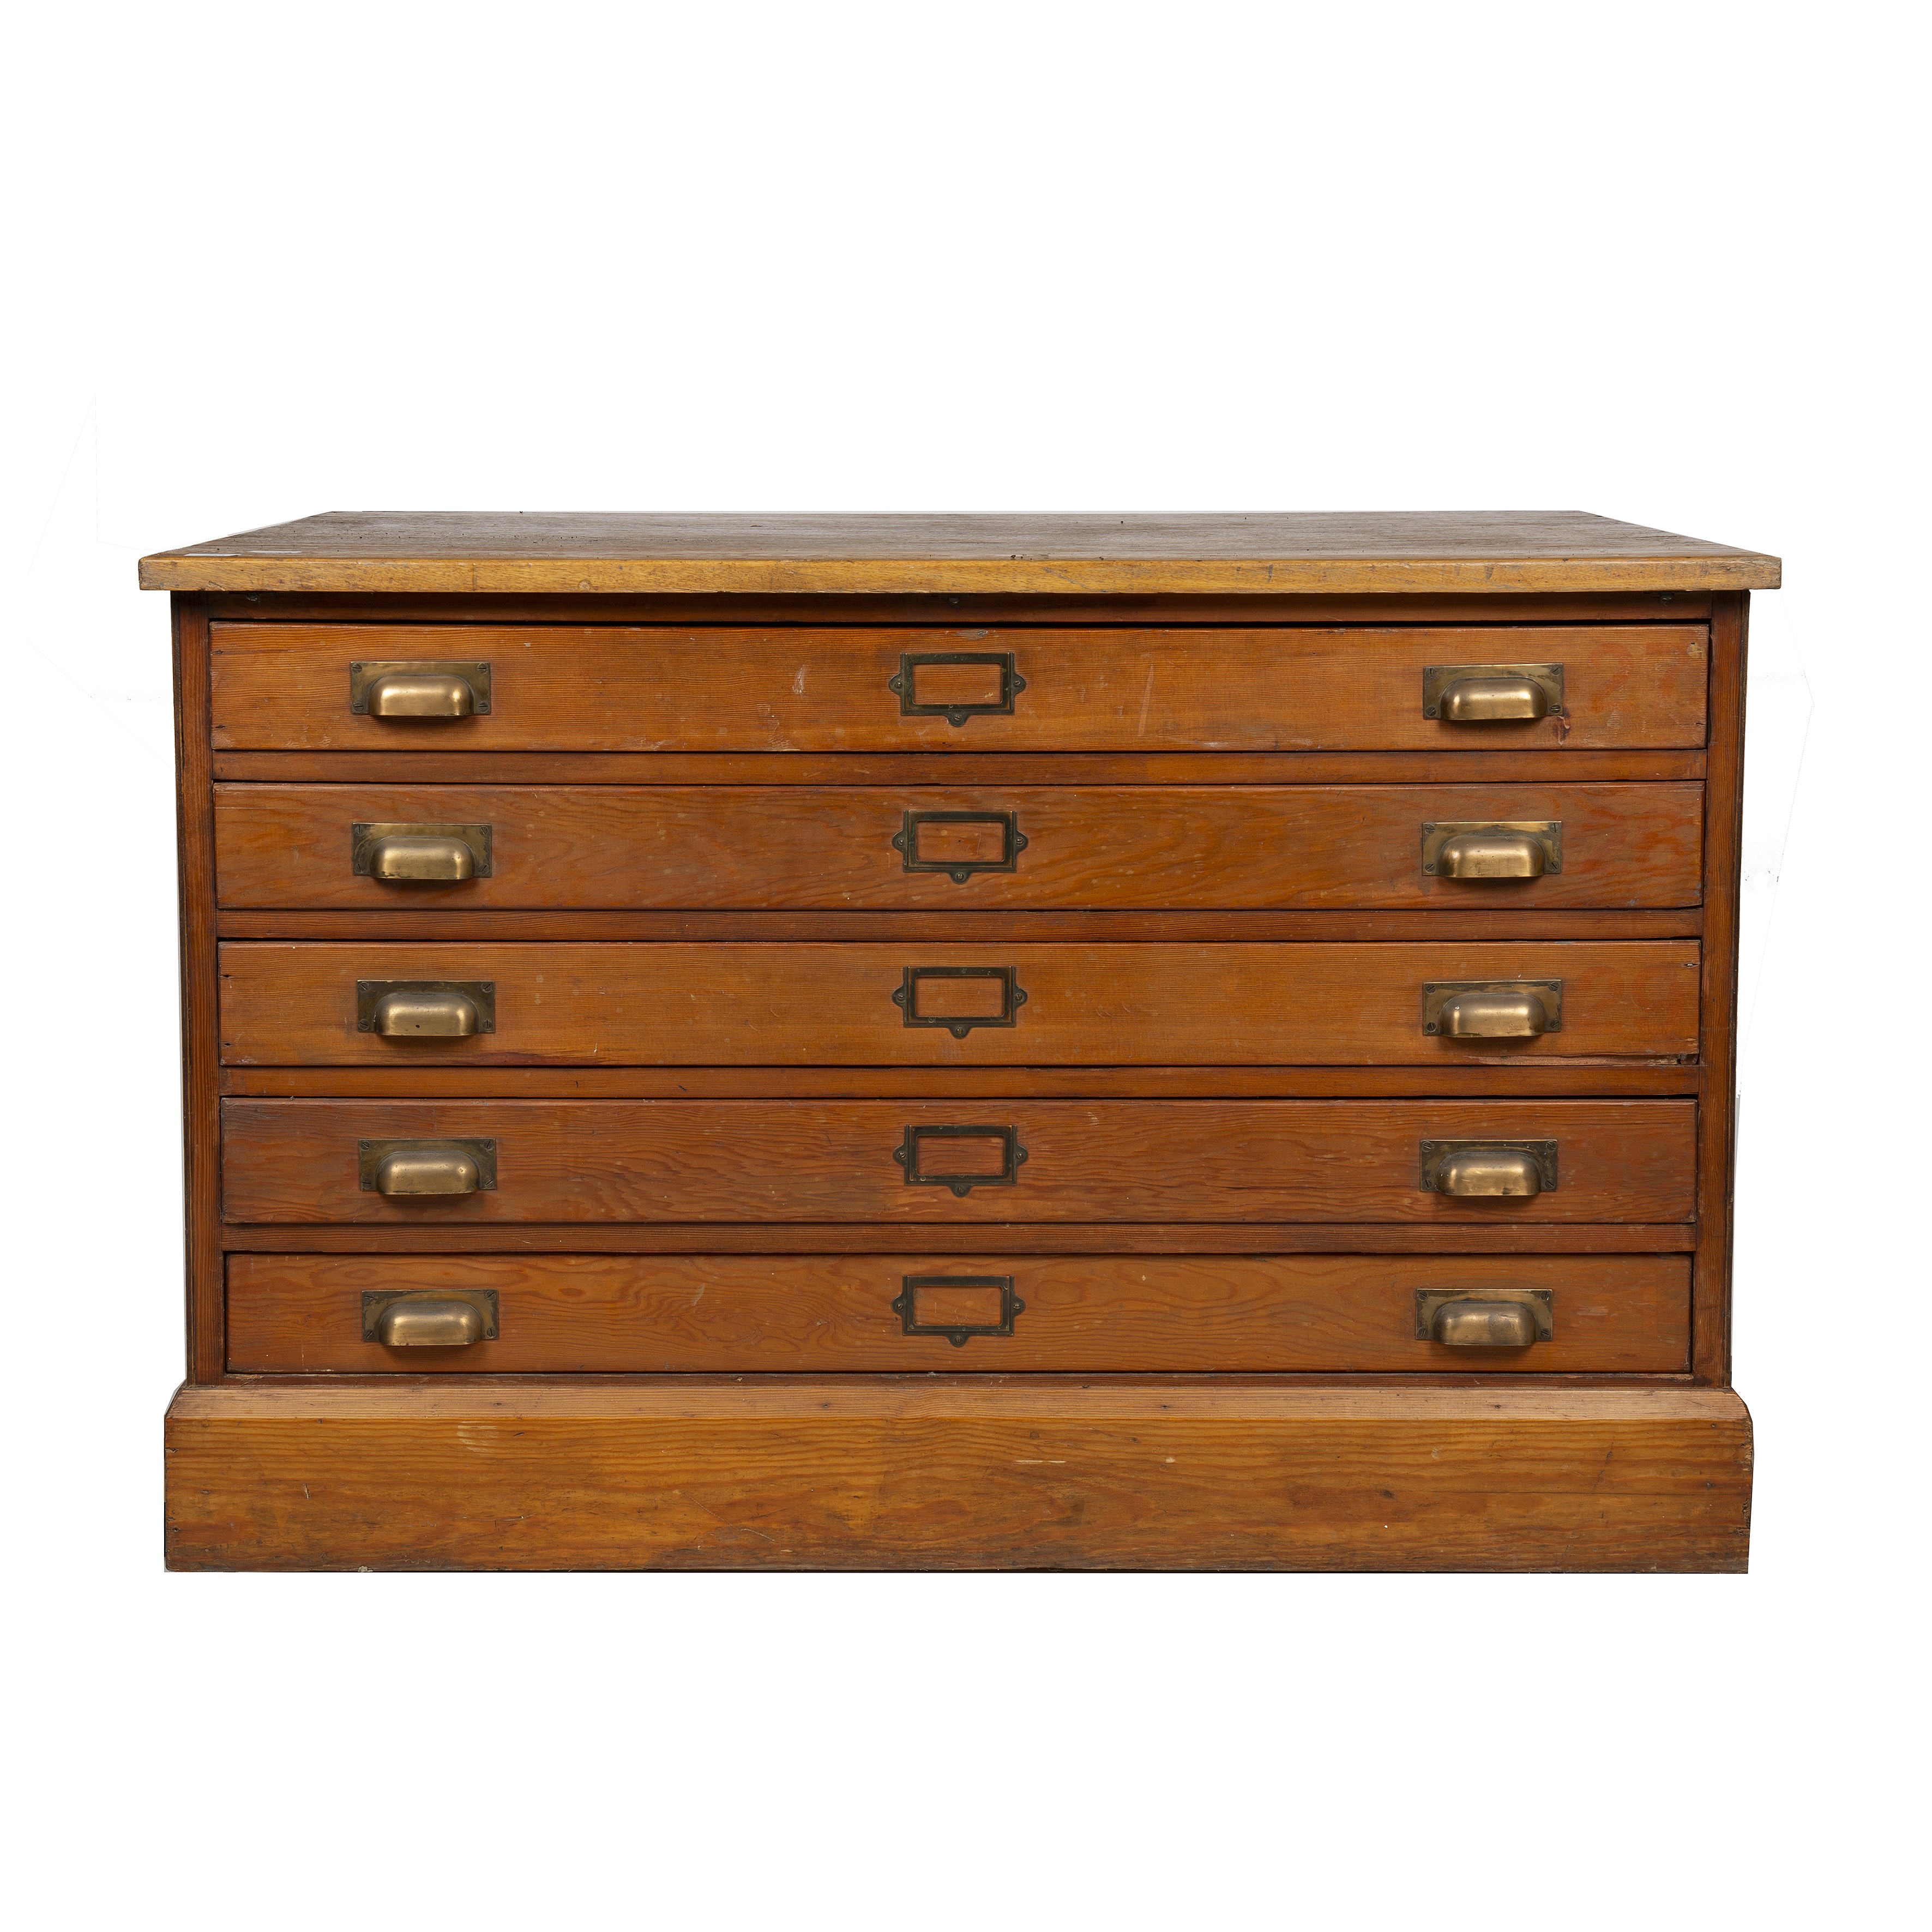 An early 20th century oak and pine five drawer plan chest, with cup handles and a plinth base, 120cm - Image 2 of 5